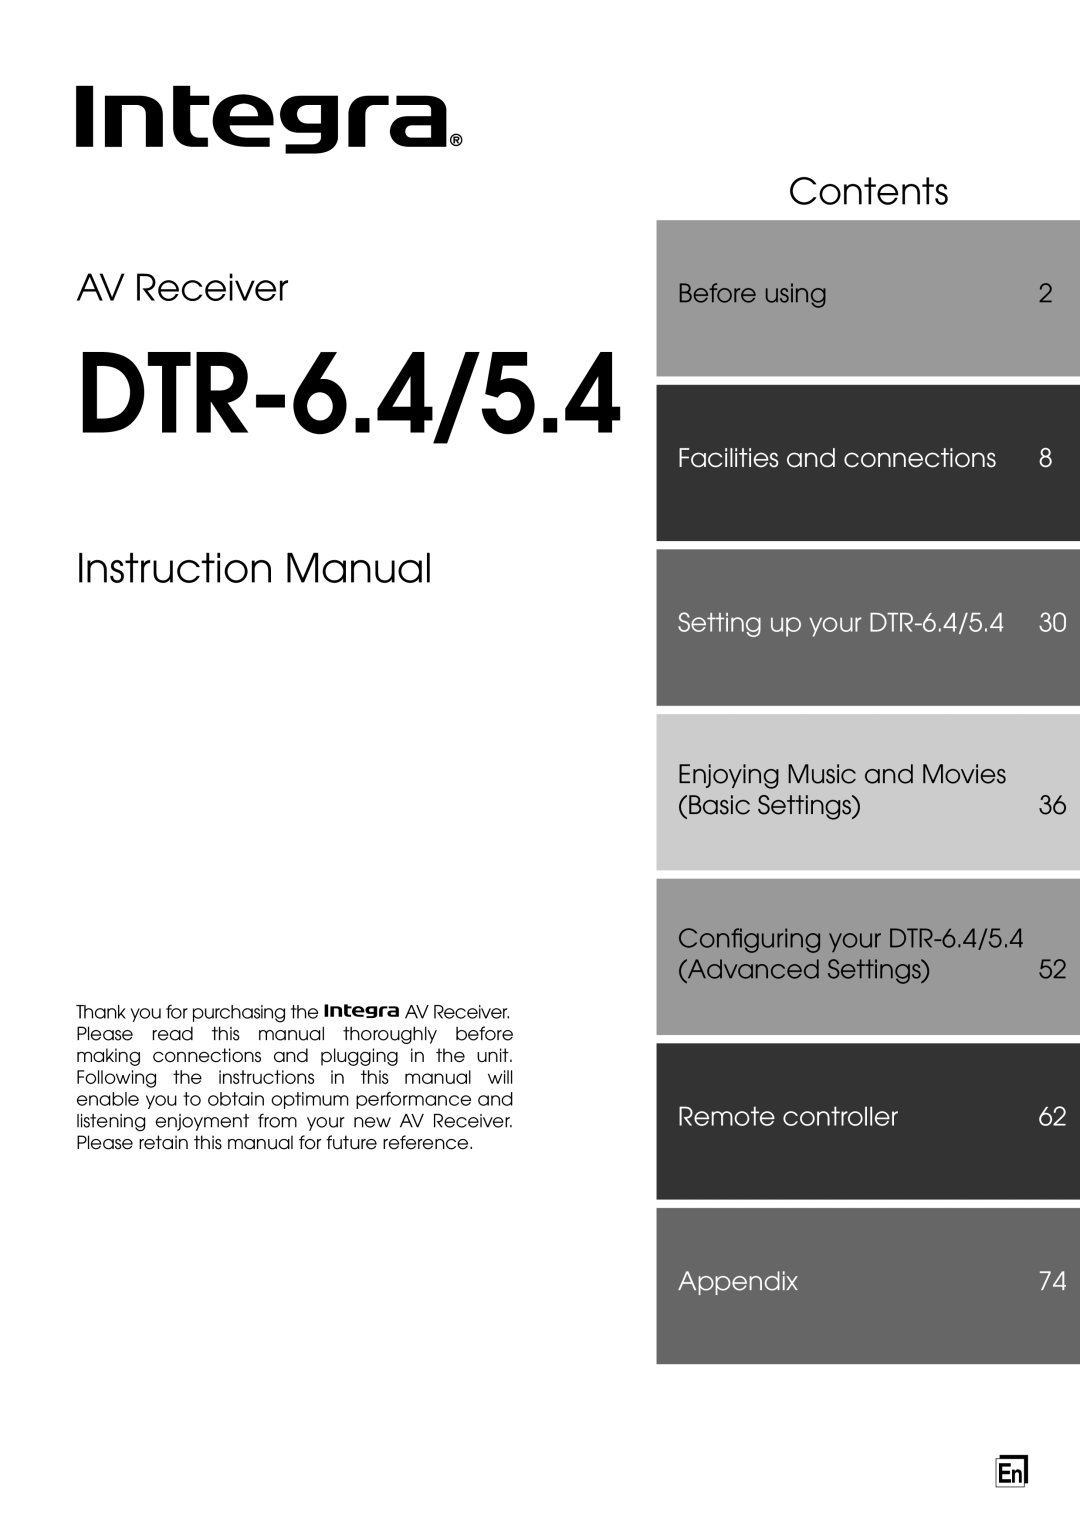 Integra DTR-6.4/5.4 instruction manual Instruction Manual, AV Receiver, Contents, Before using, Facilities and connections 